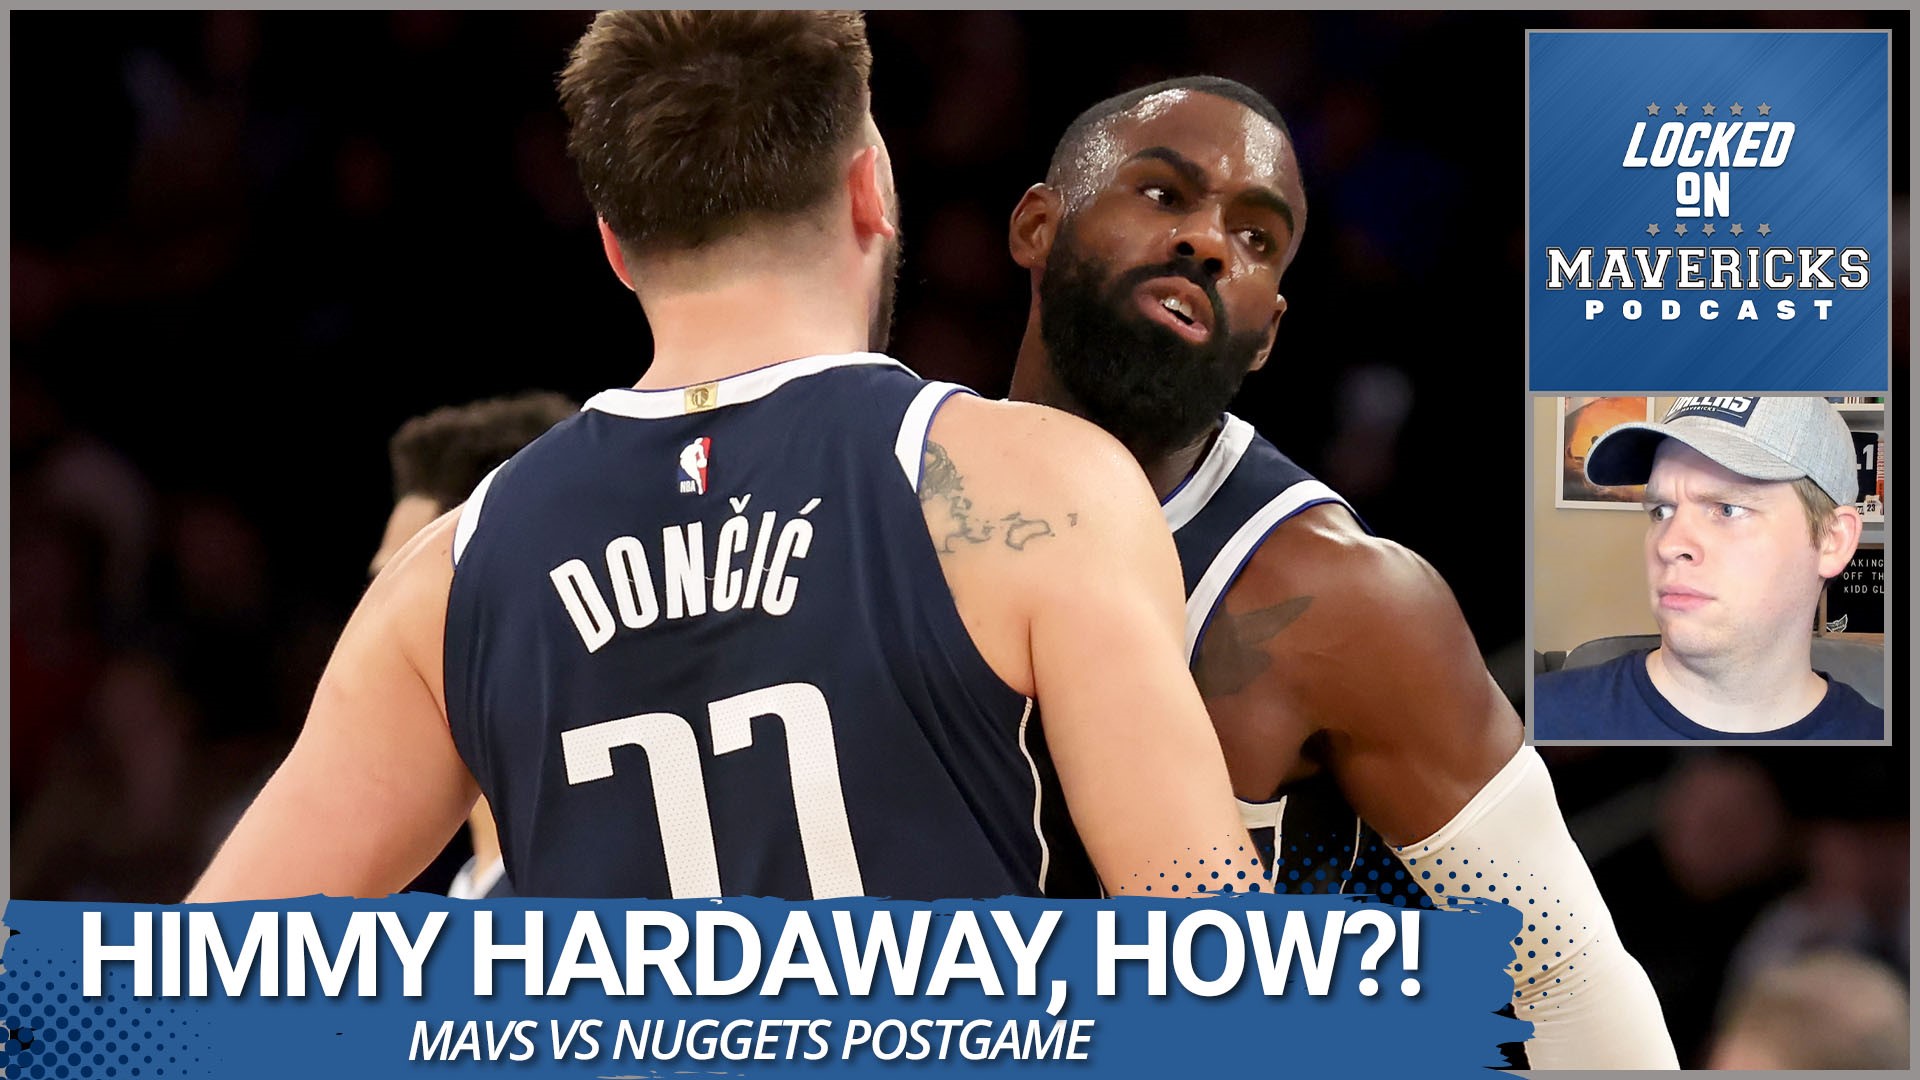 Nick Angstadt (that's right, the streak continues) breaks down the Mavs big win over the Nuggets and how the Mavs found a way to win when Luka Doncic wasn't at his b